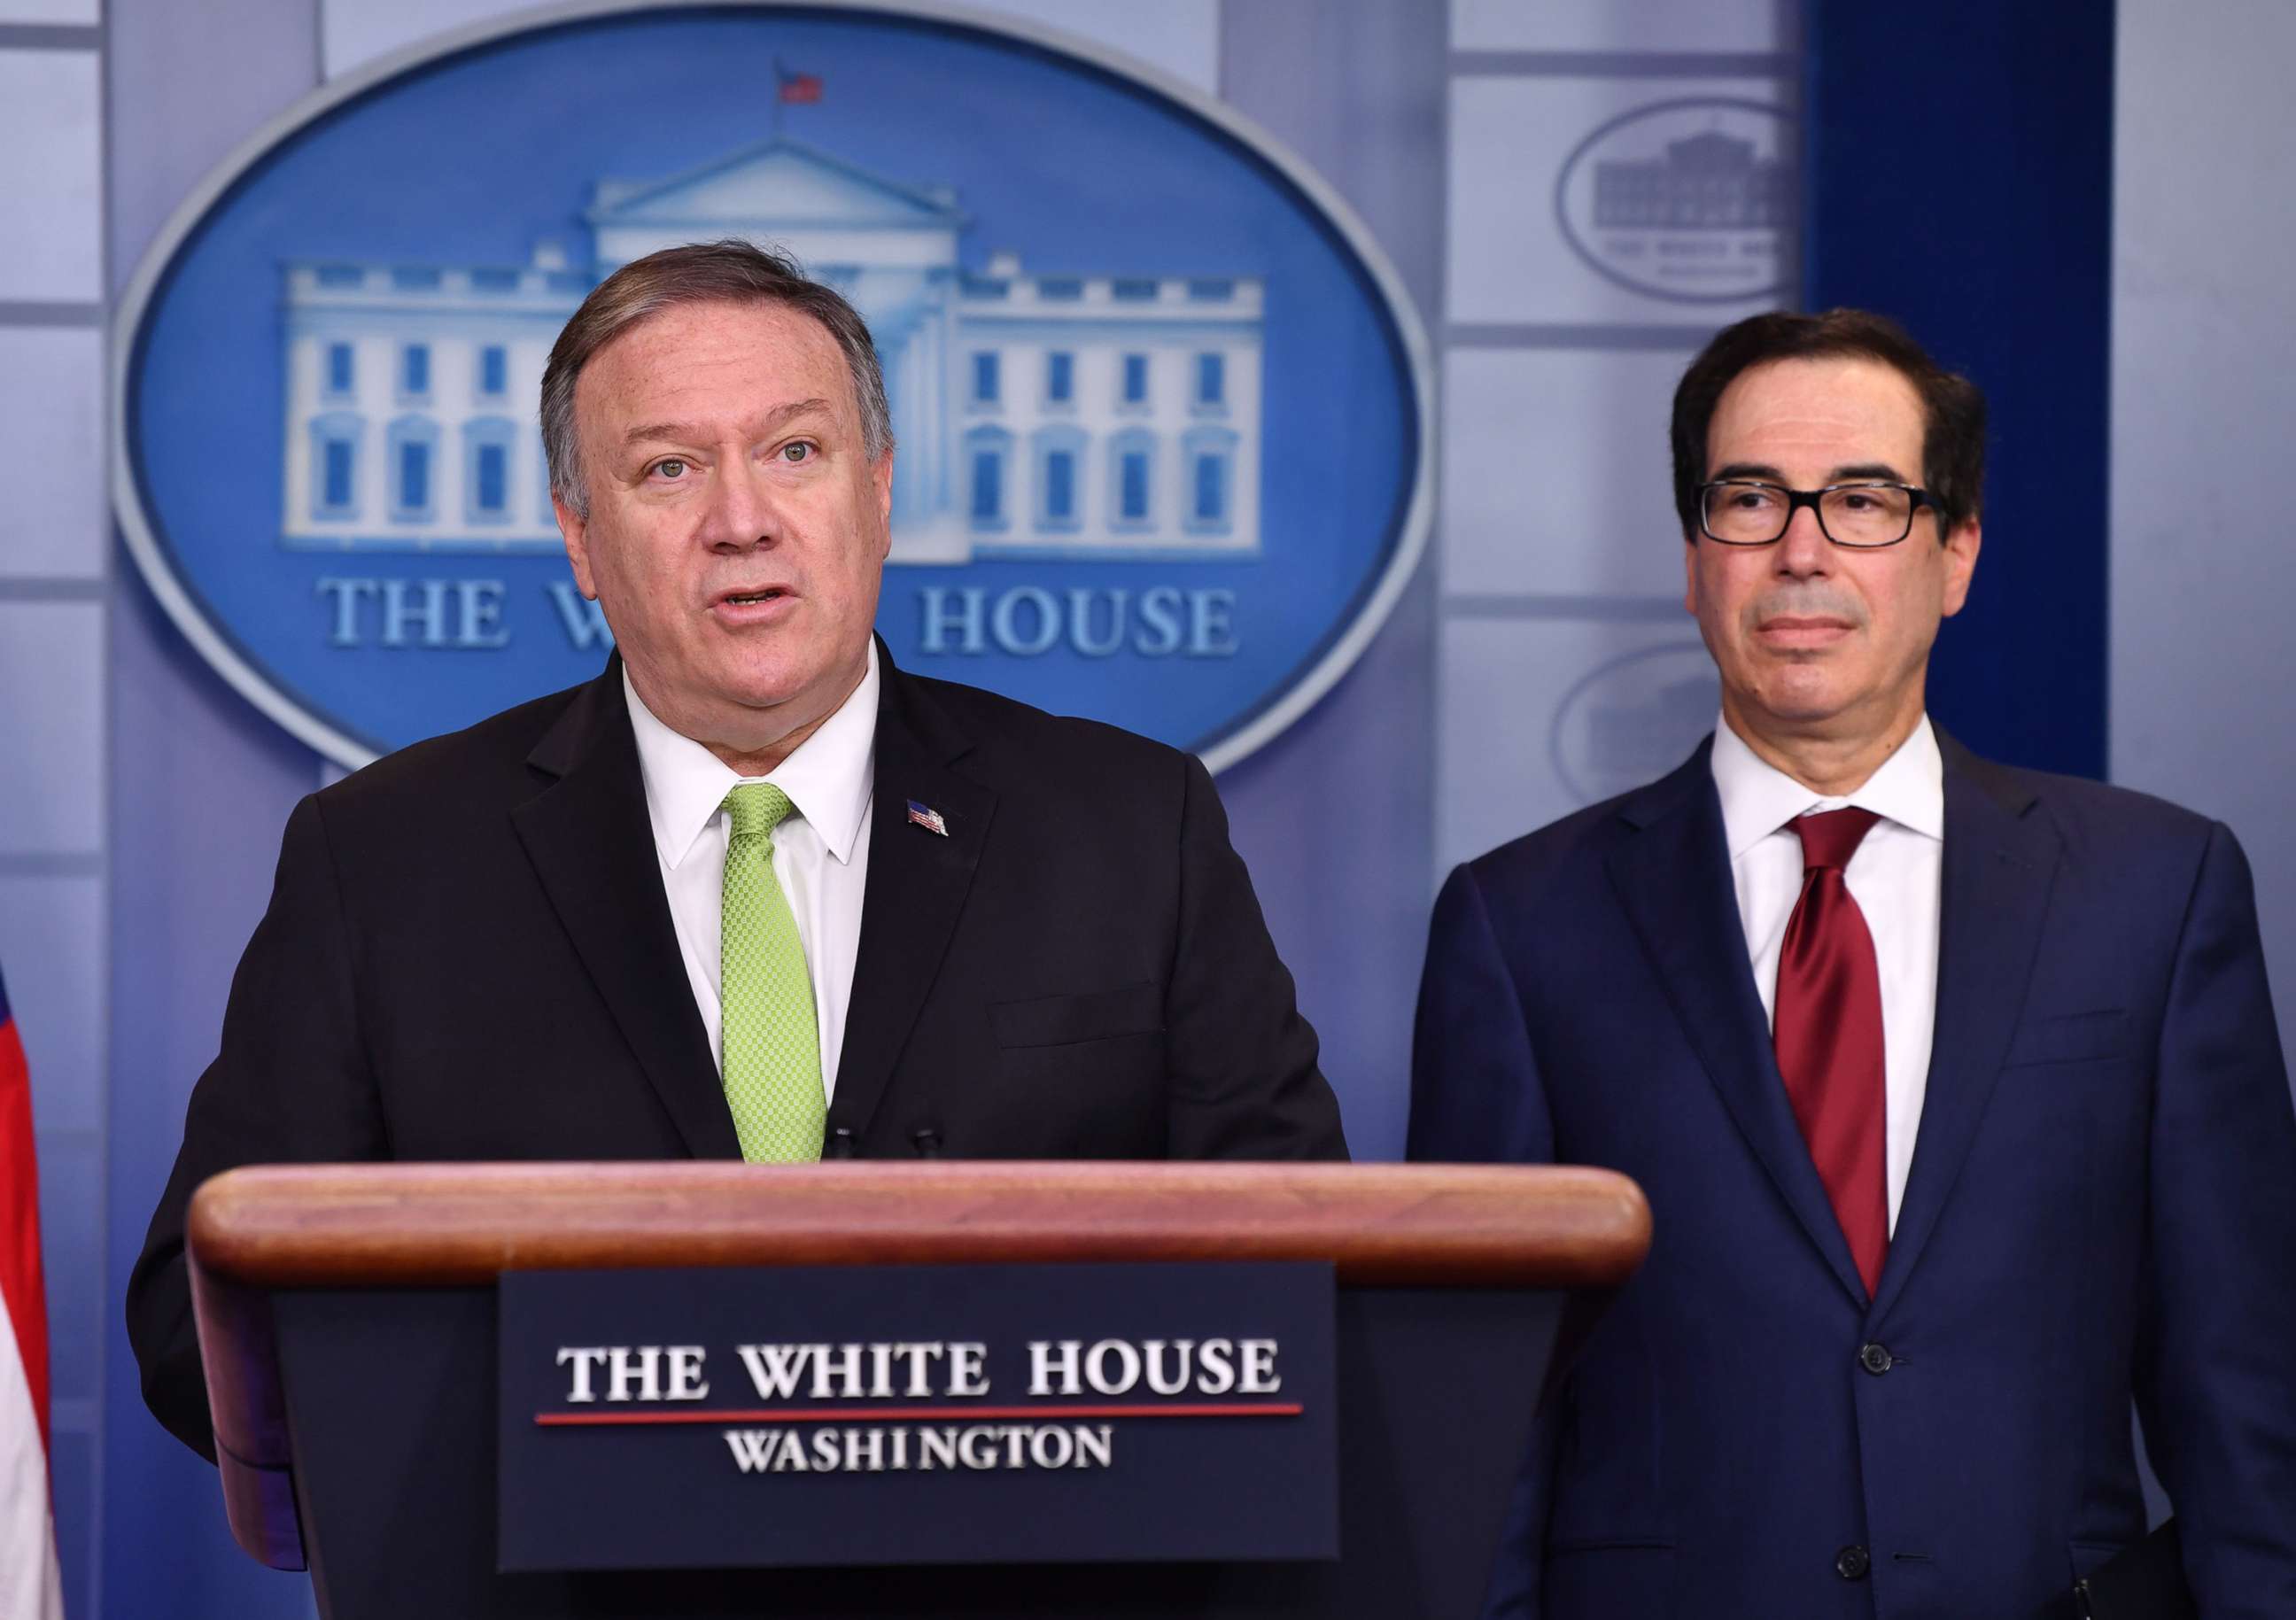 PHOTO: Secretary of State Mike Pompeo and Treasury Secretary Steven Mnuchin announce new sanctions on Iran, at the White House in Washington, D.C., Jan. 10, 2020.